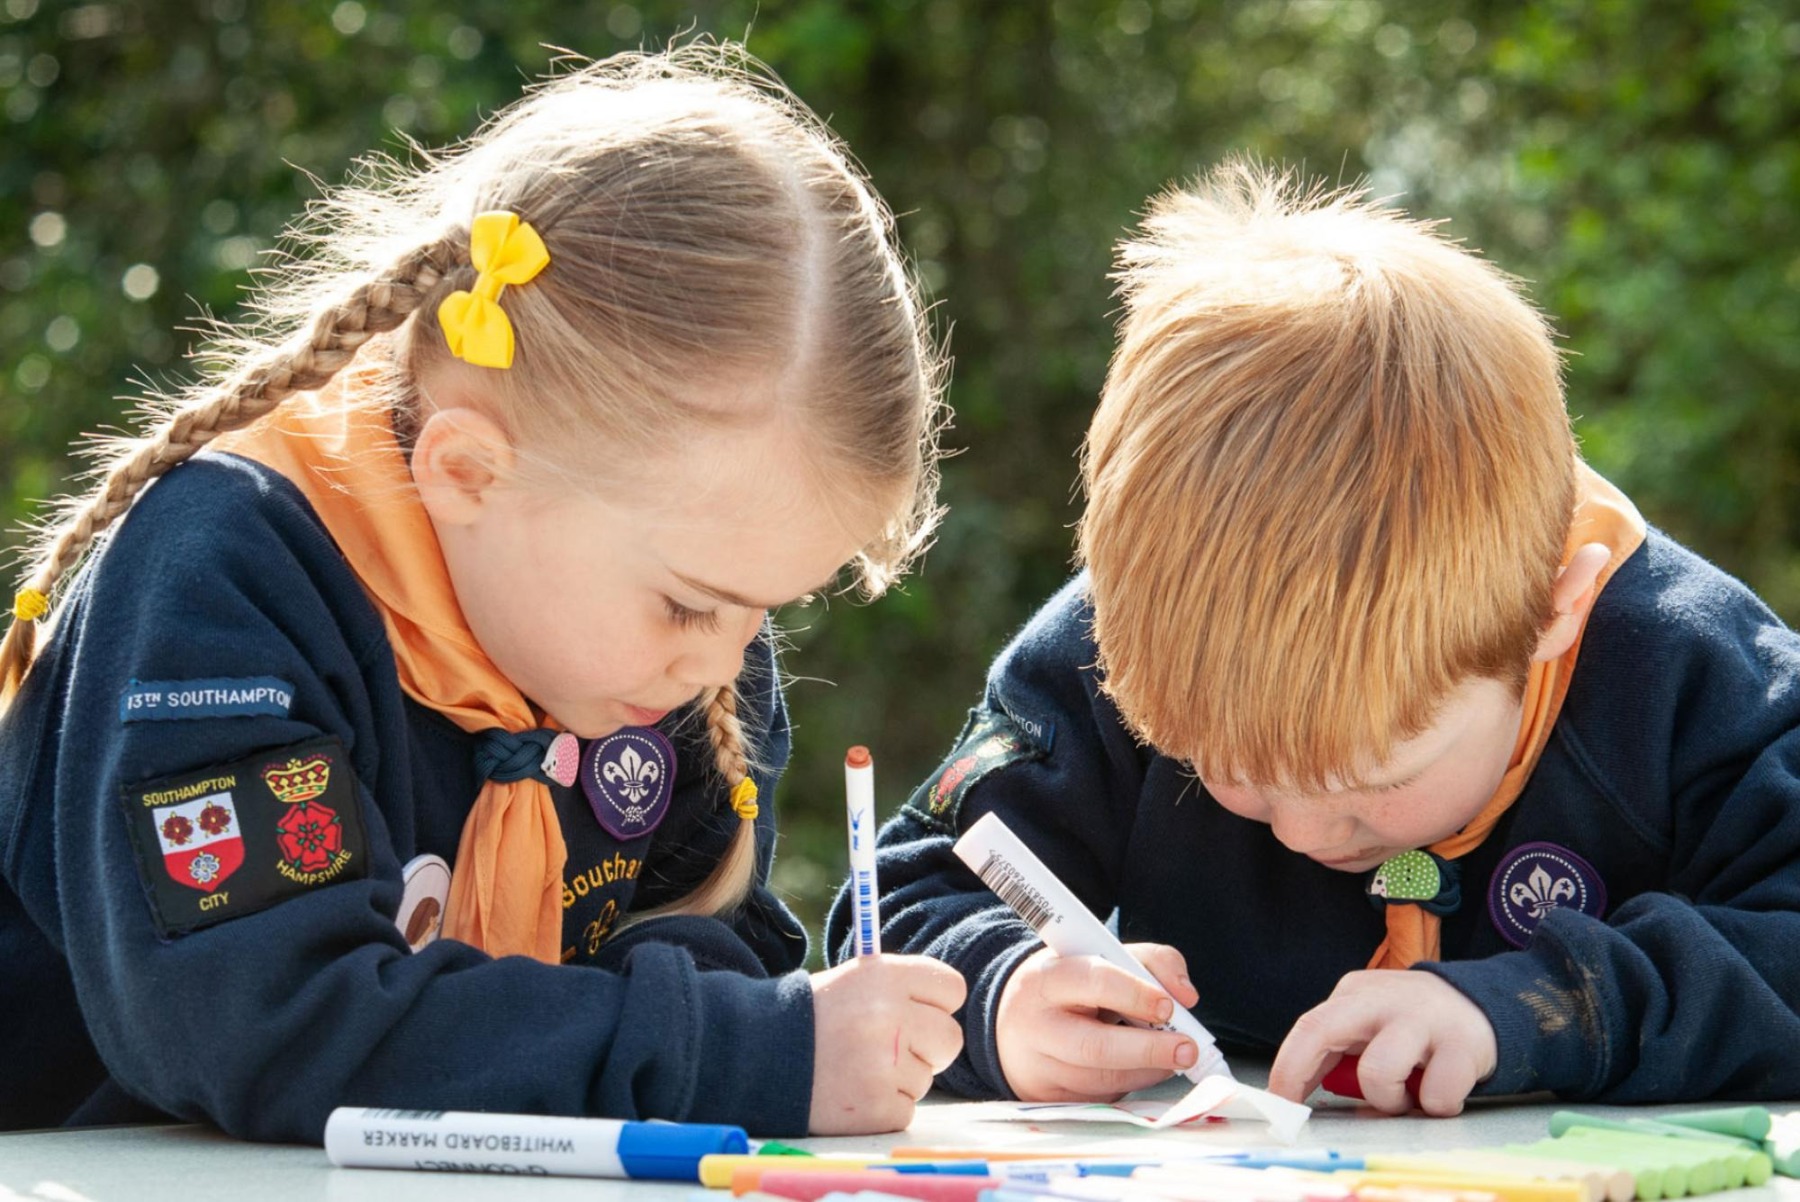 Two children using colouring pens